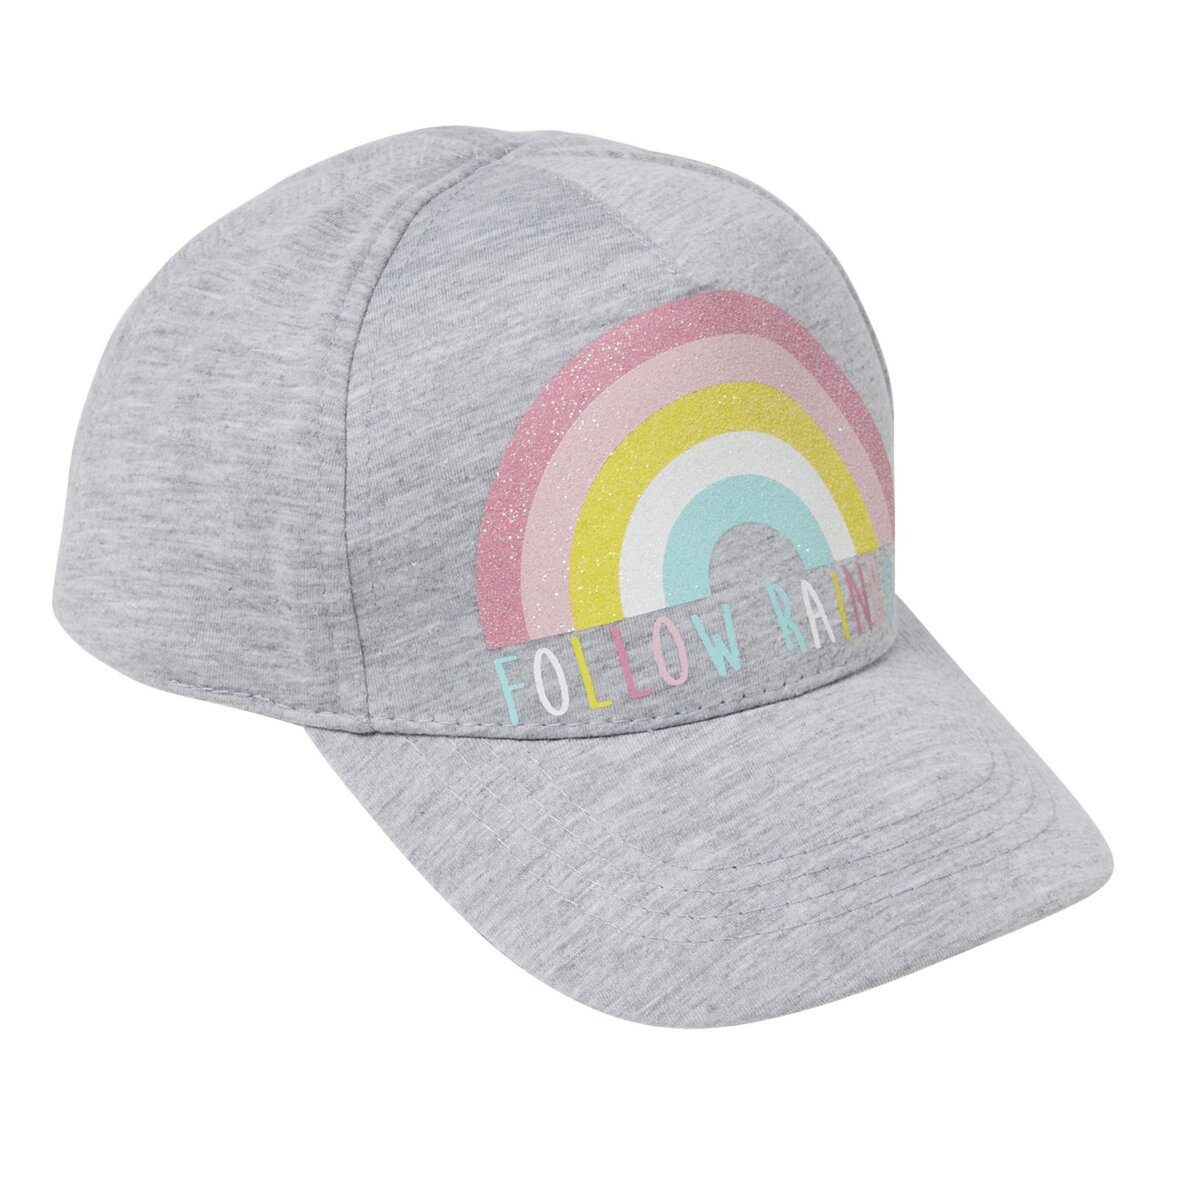 IN EXTENSO Casquette fille